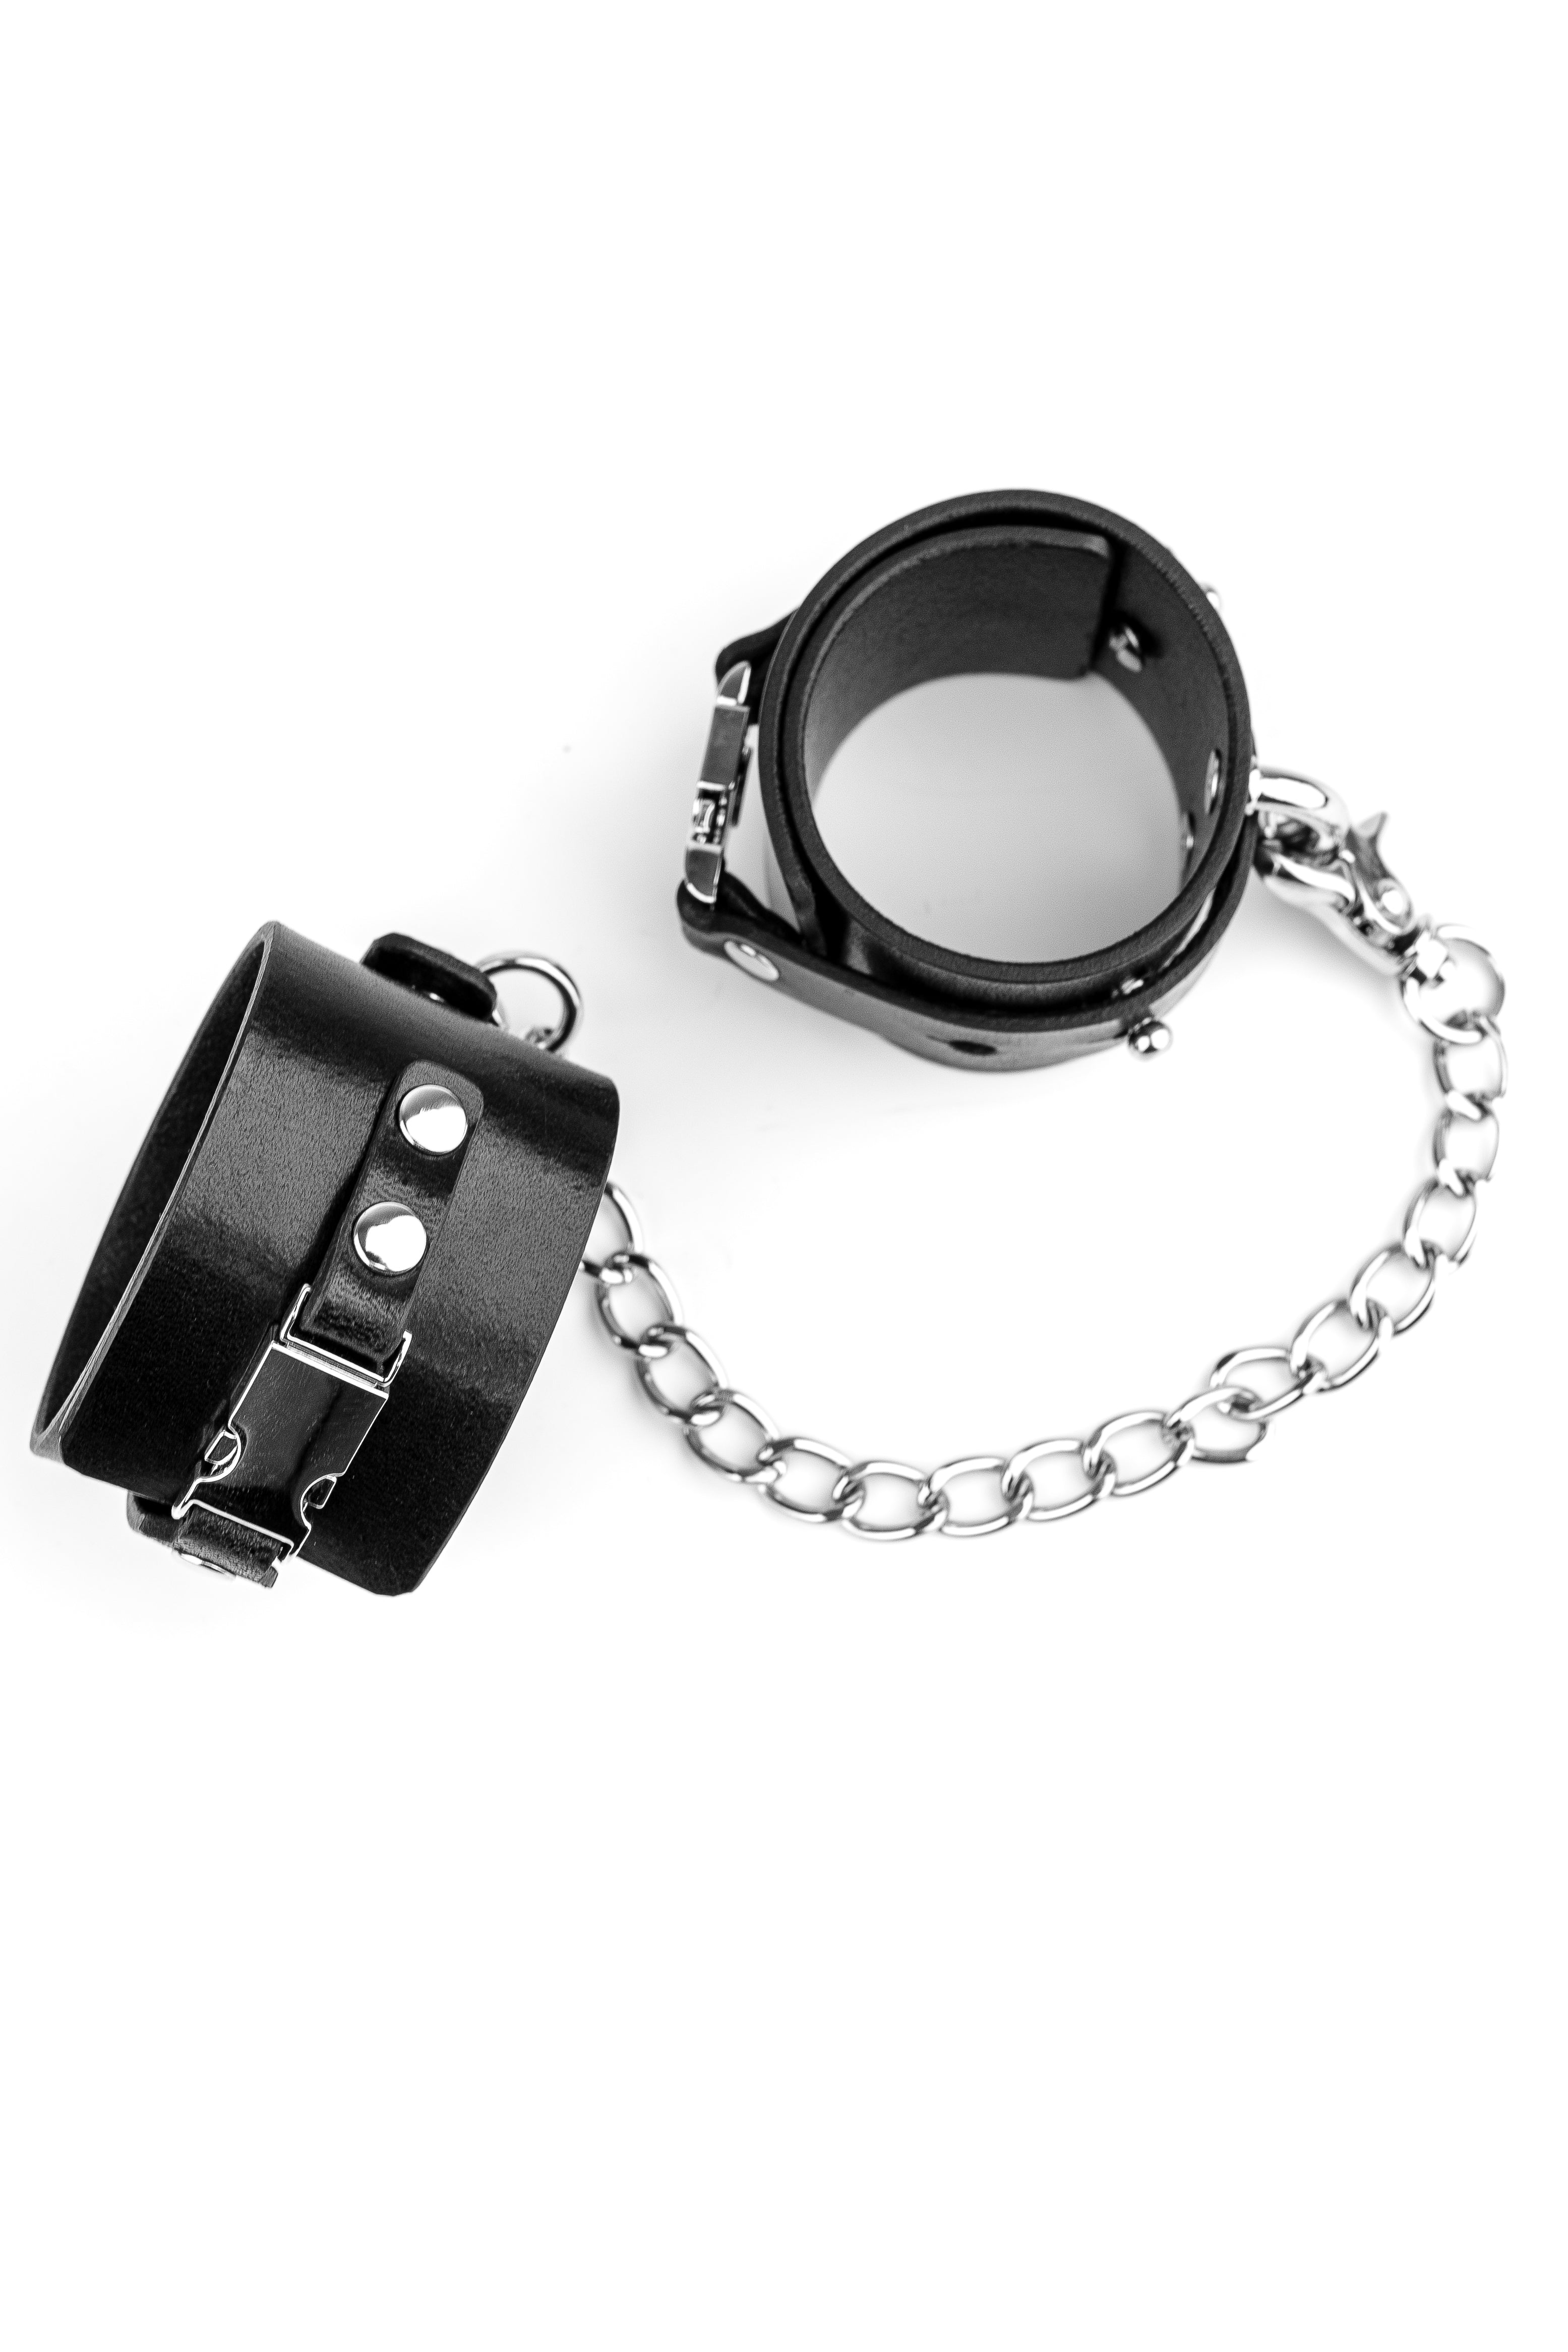 “Fast X me up” Handcuffs with chain connector